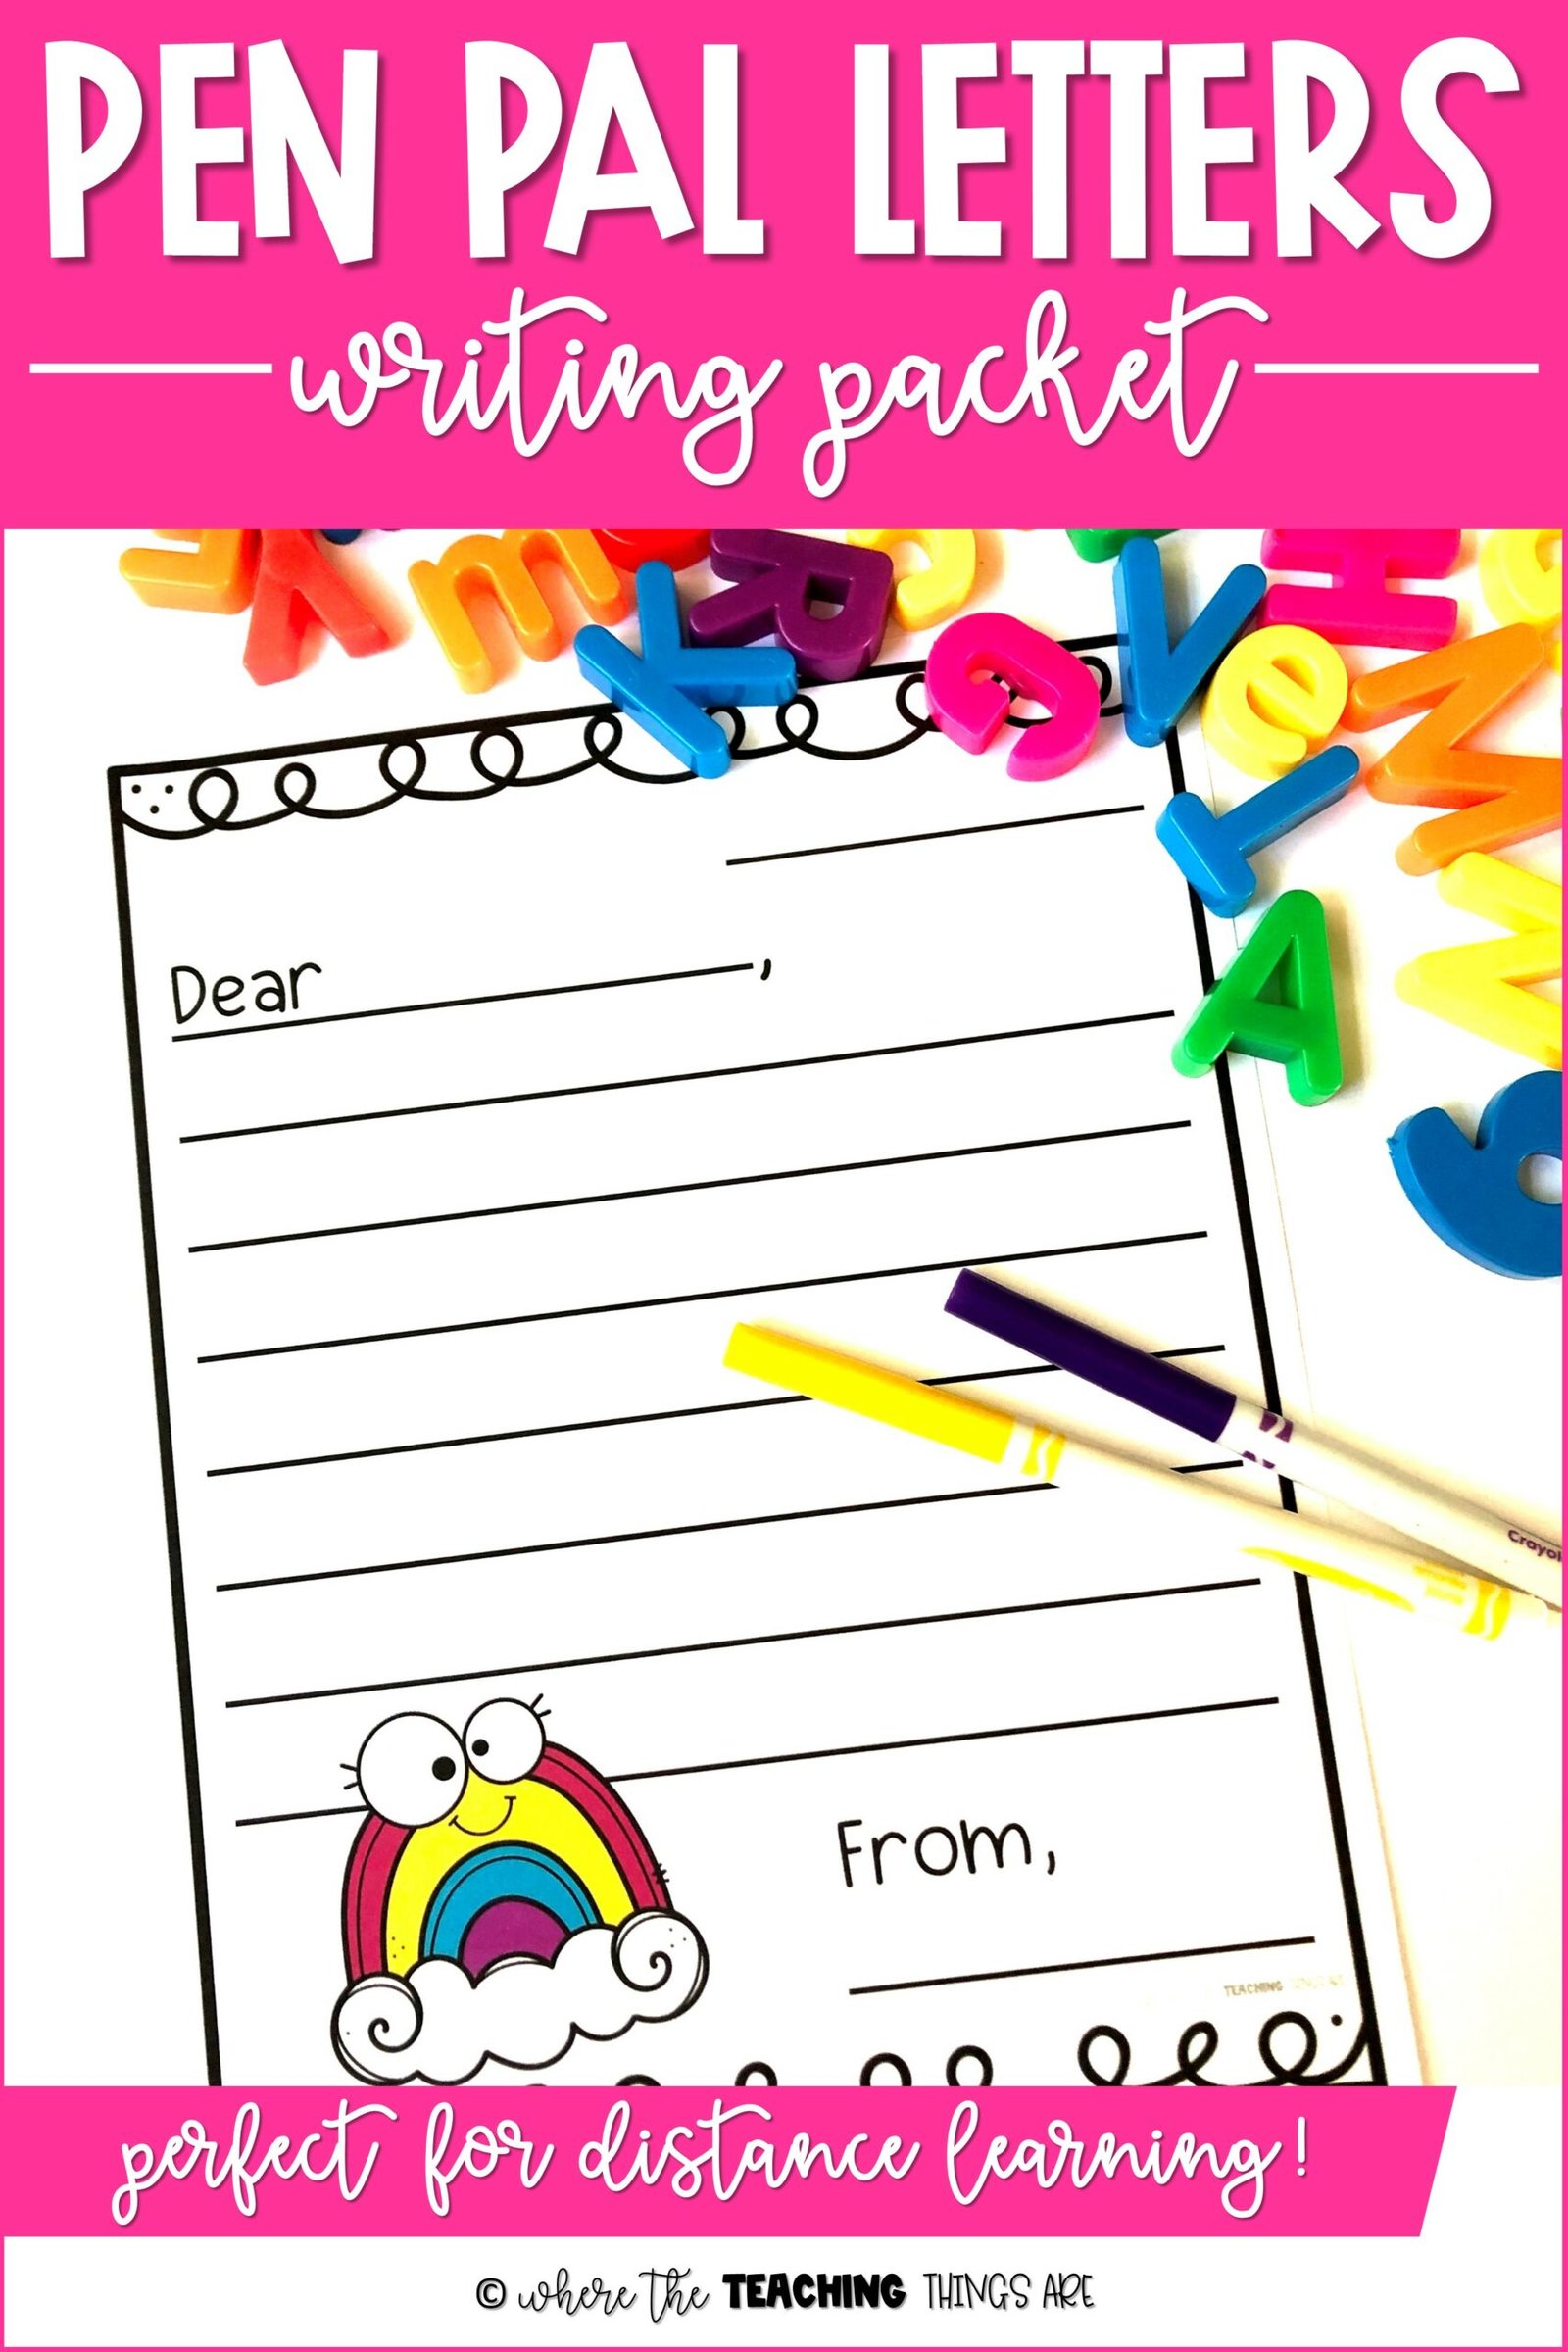 pen-pal-letters-where-the-teaching-things-are